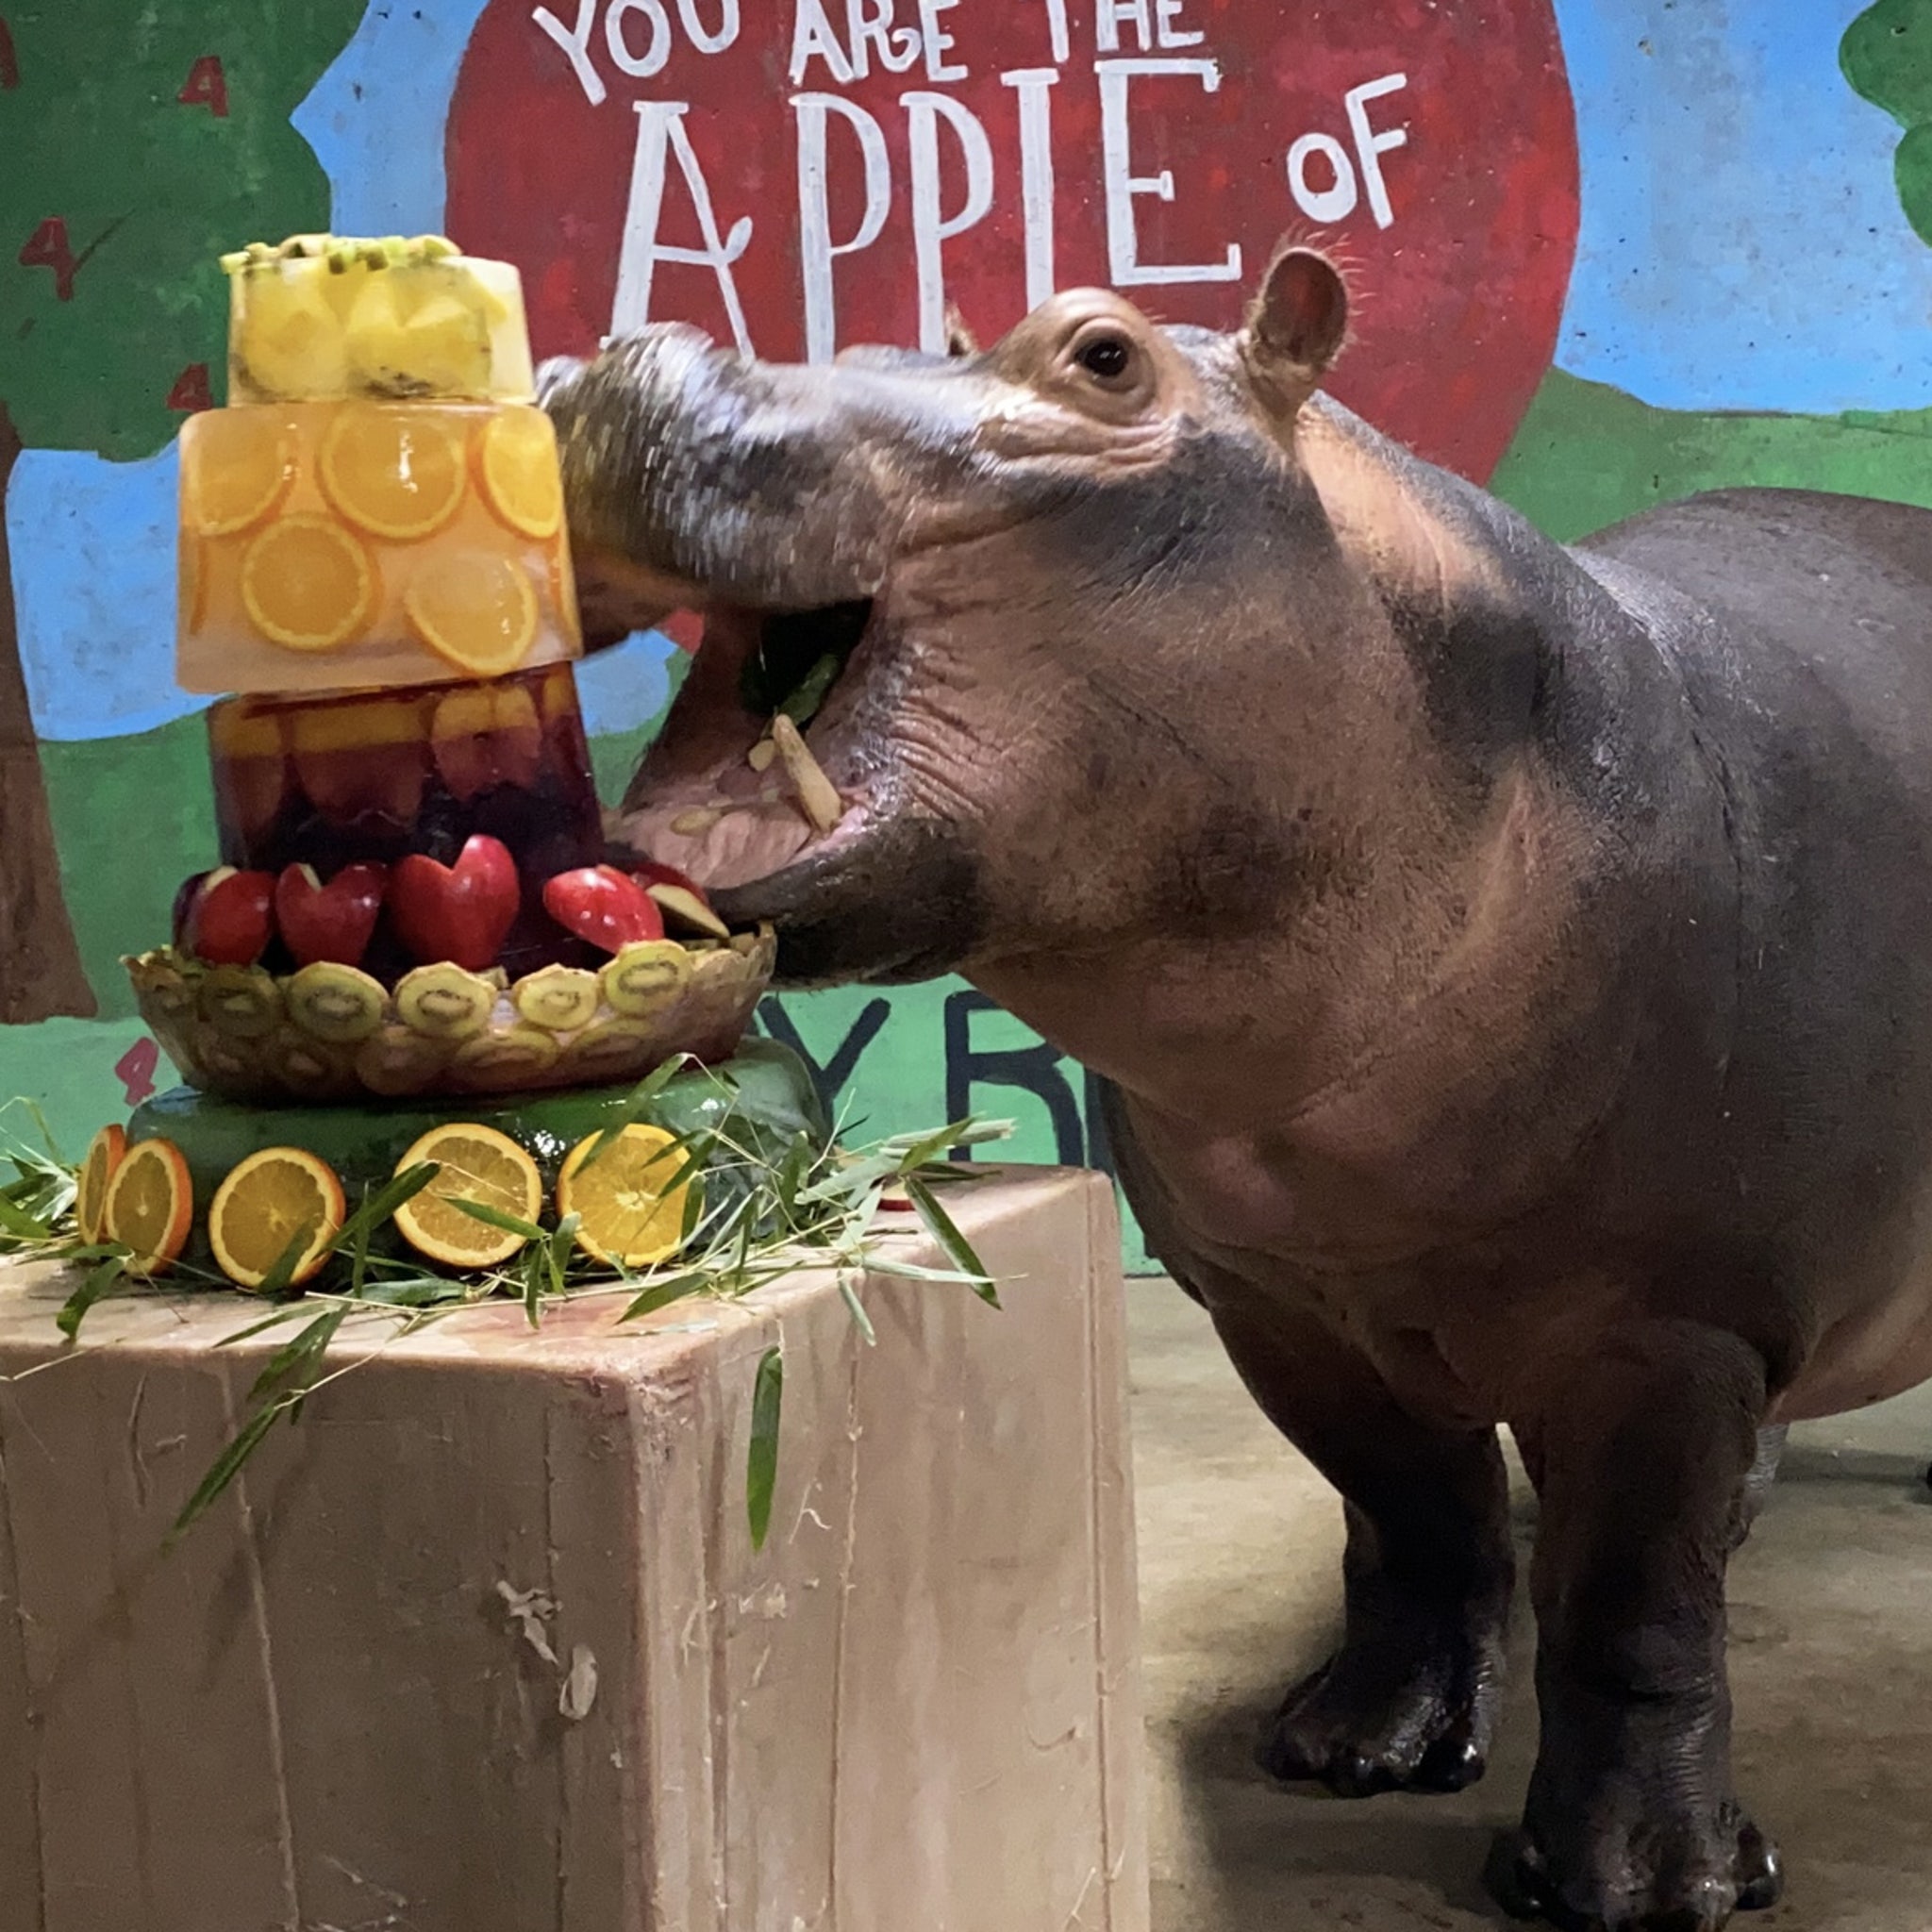 Fiona The Hippo Celebrates 4th Birthday At Cincinnati Zoo Receives Special Frozen Fruit Cake